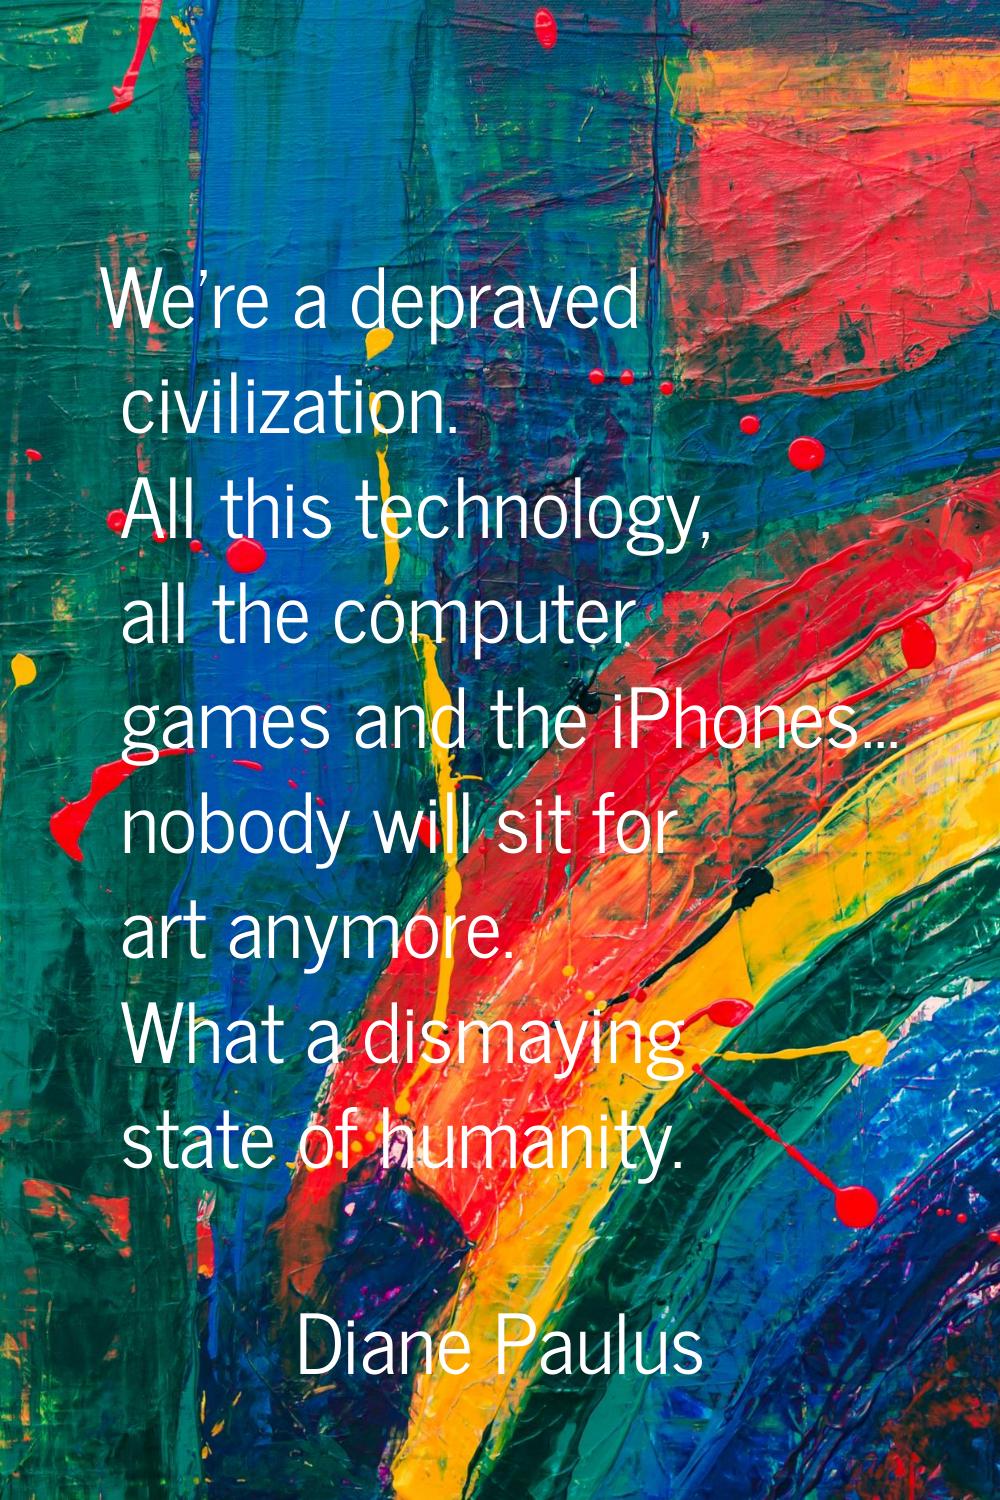 We're a depraved civilization. All this technology, all the computer games and the iPhones... nobod